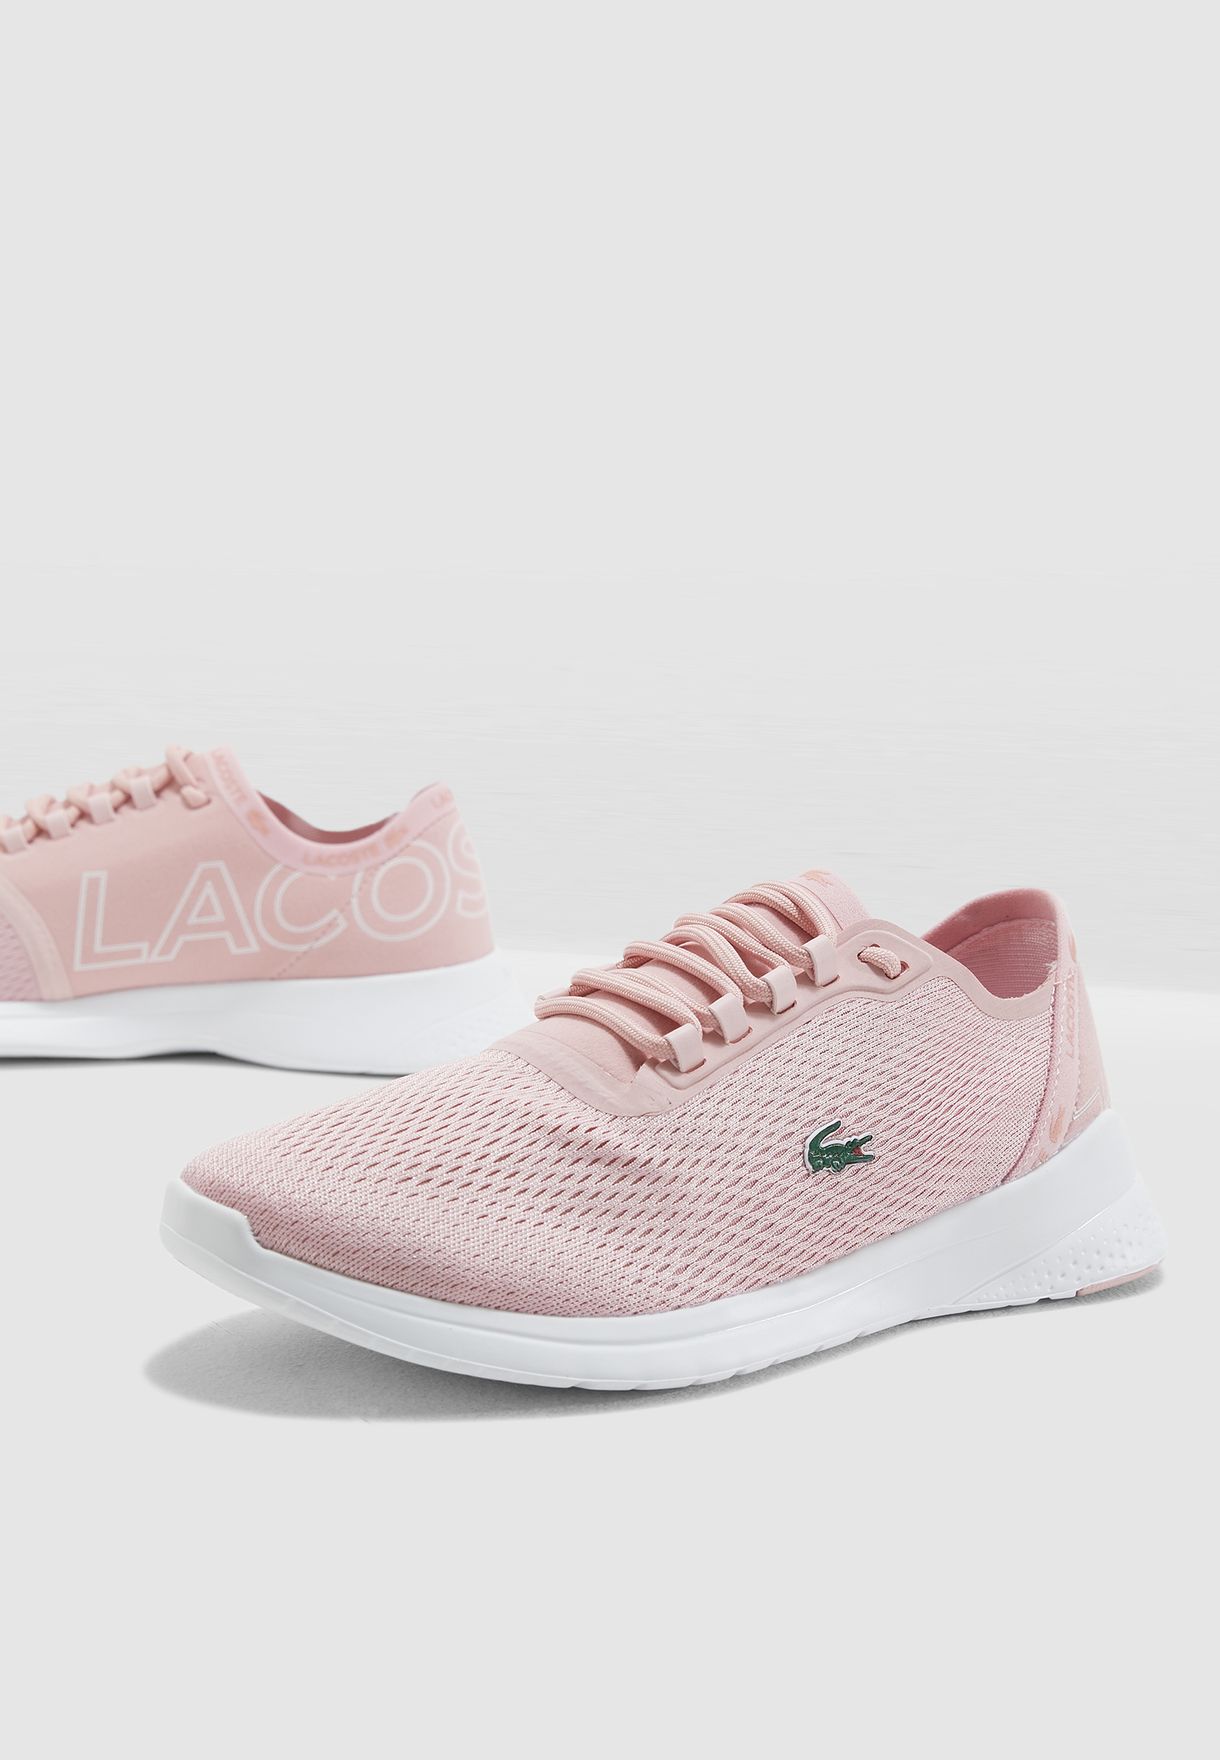 lacoste pink shoes